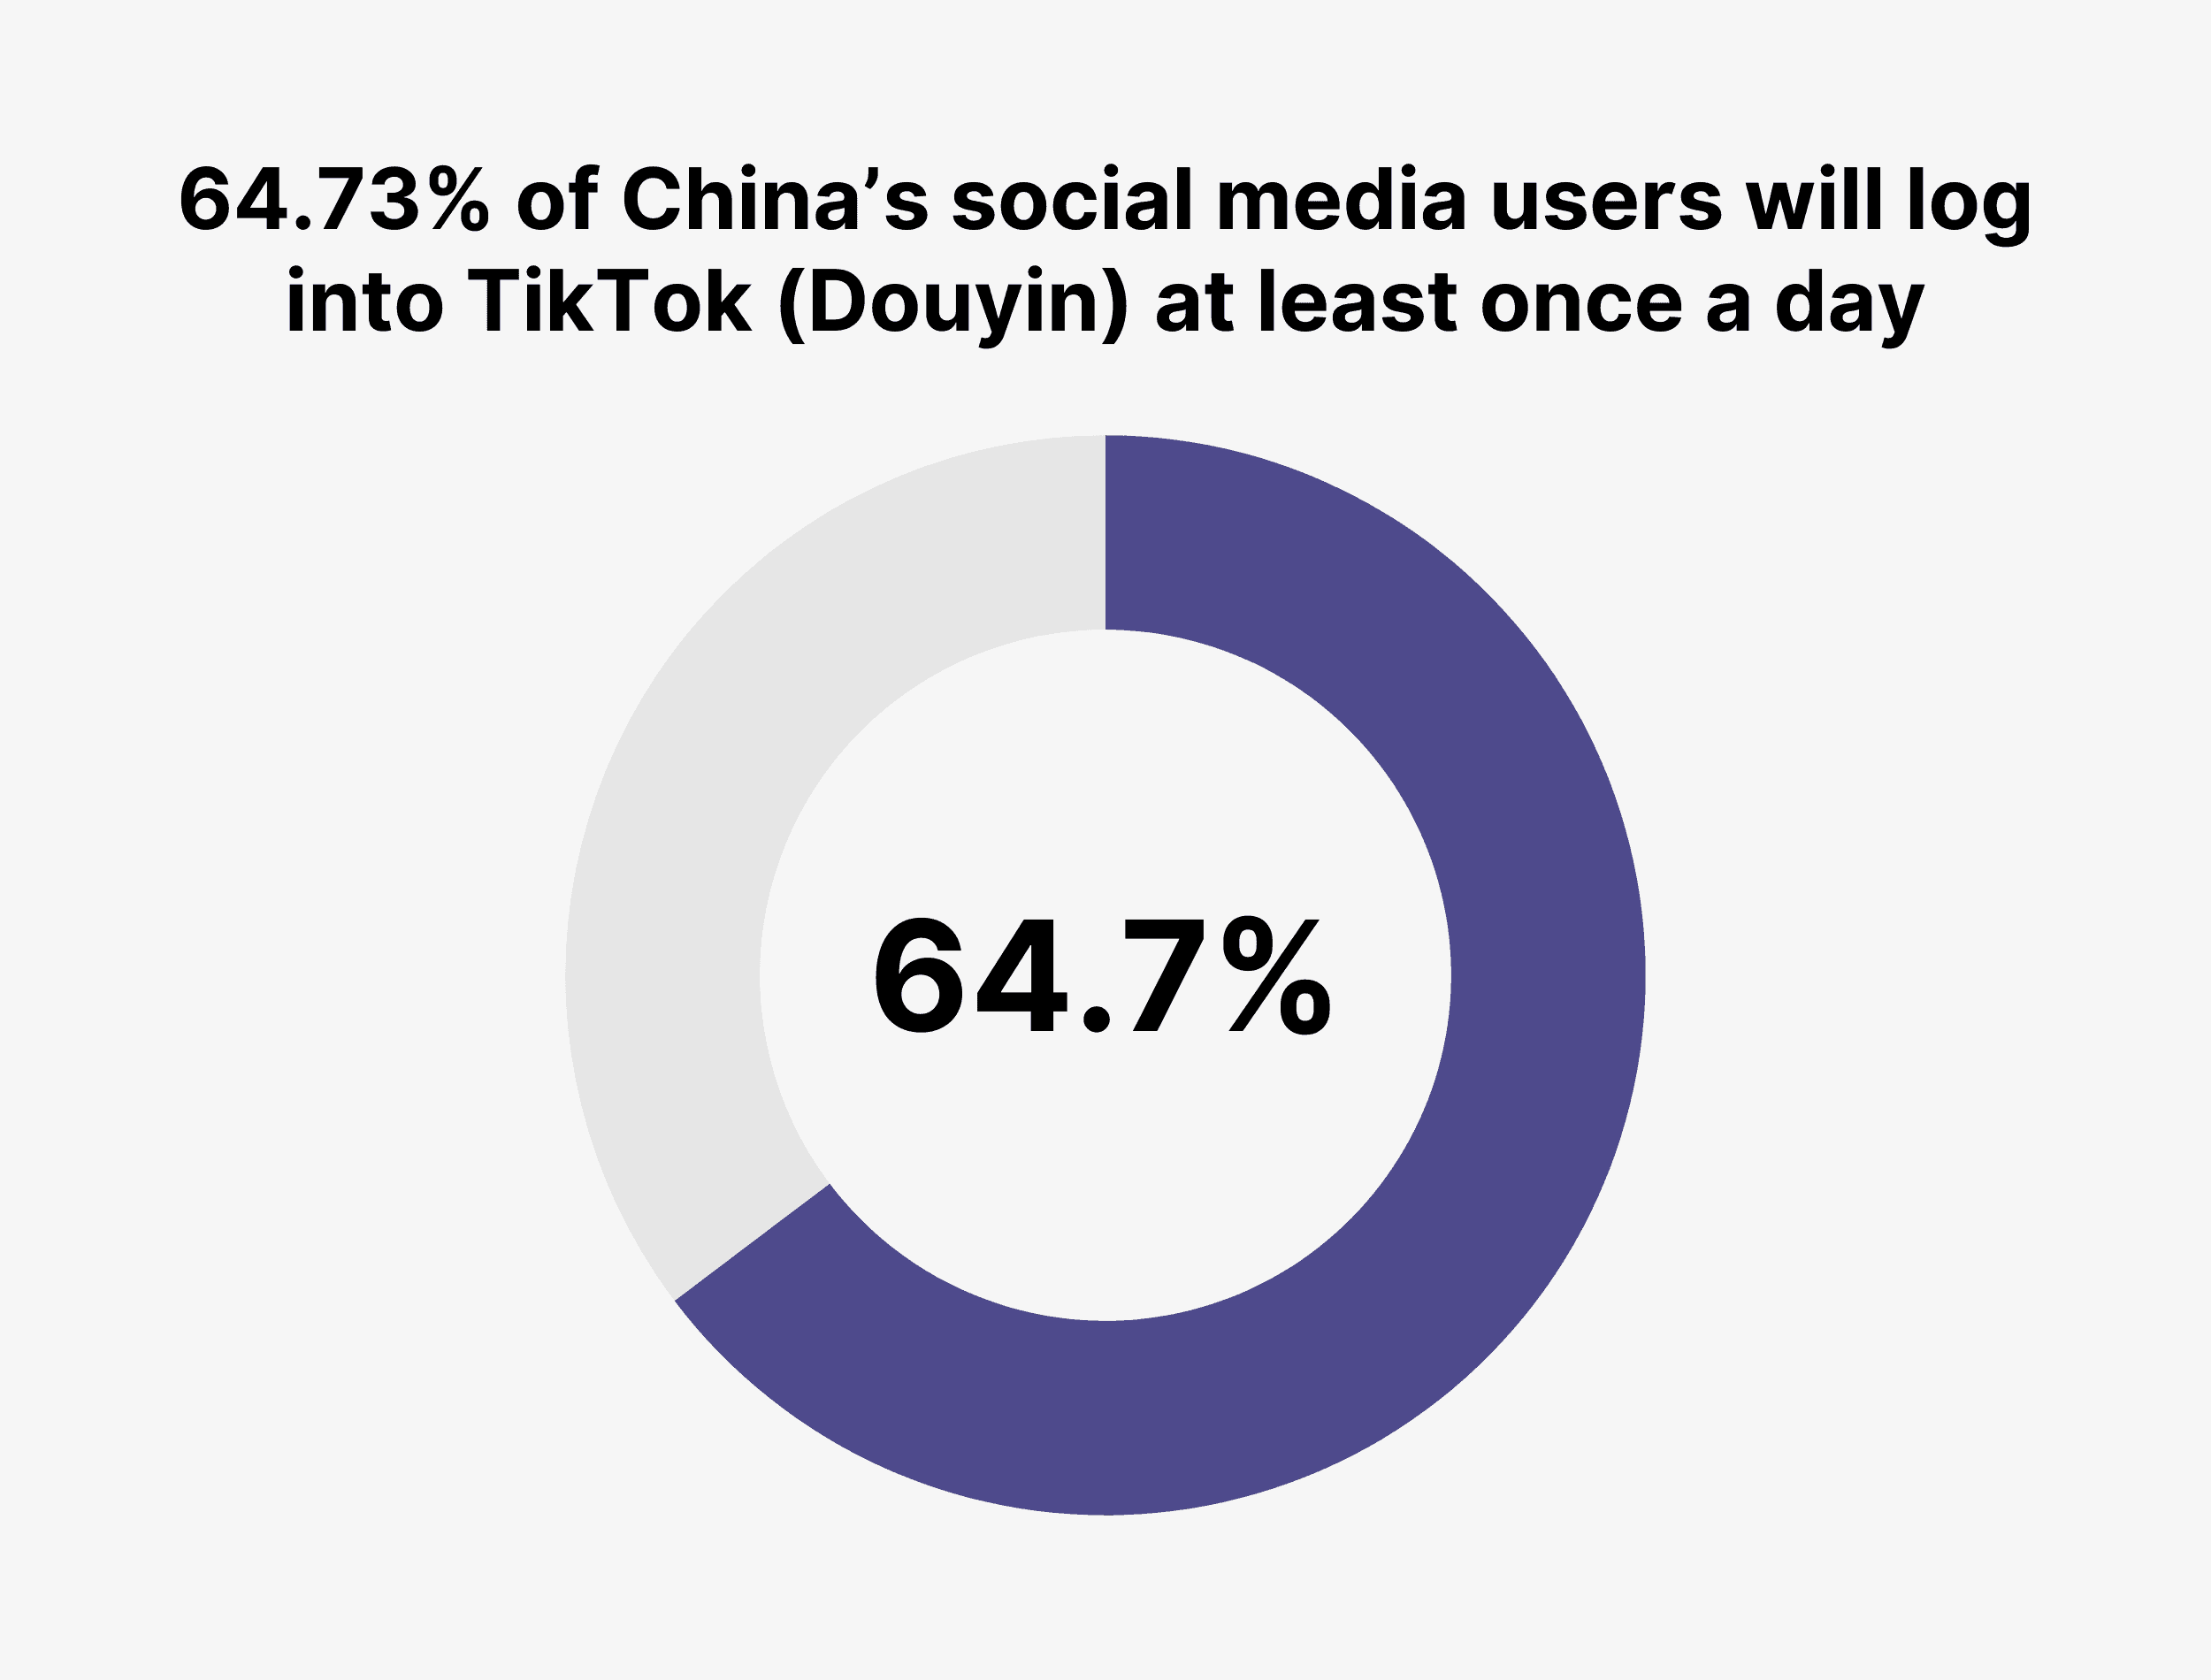 64.73% of China’s 926.84 million social media users will log into TikTok (Douyin) at least once a day